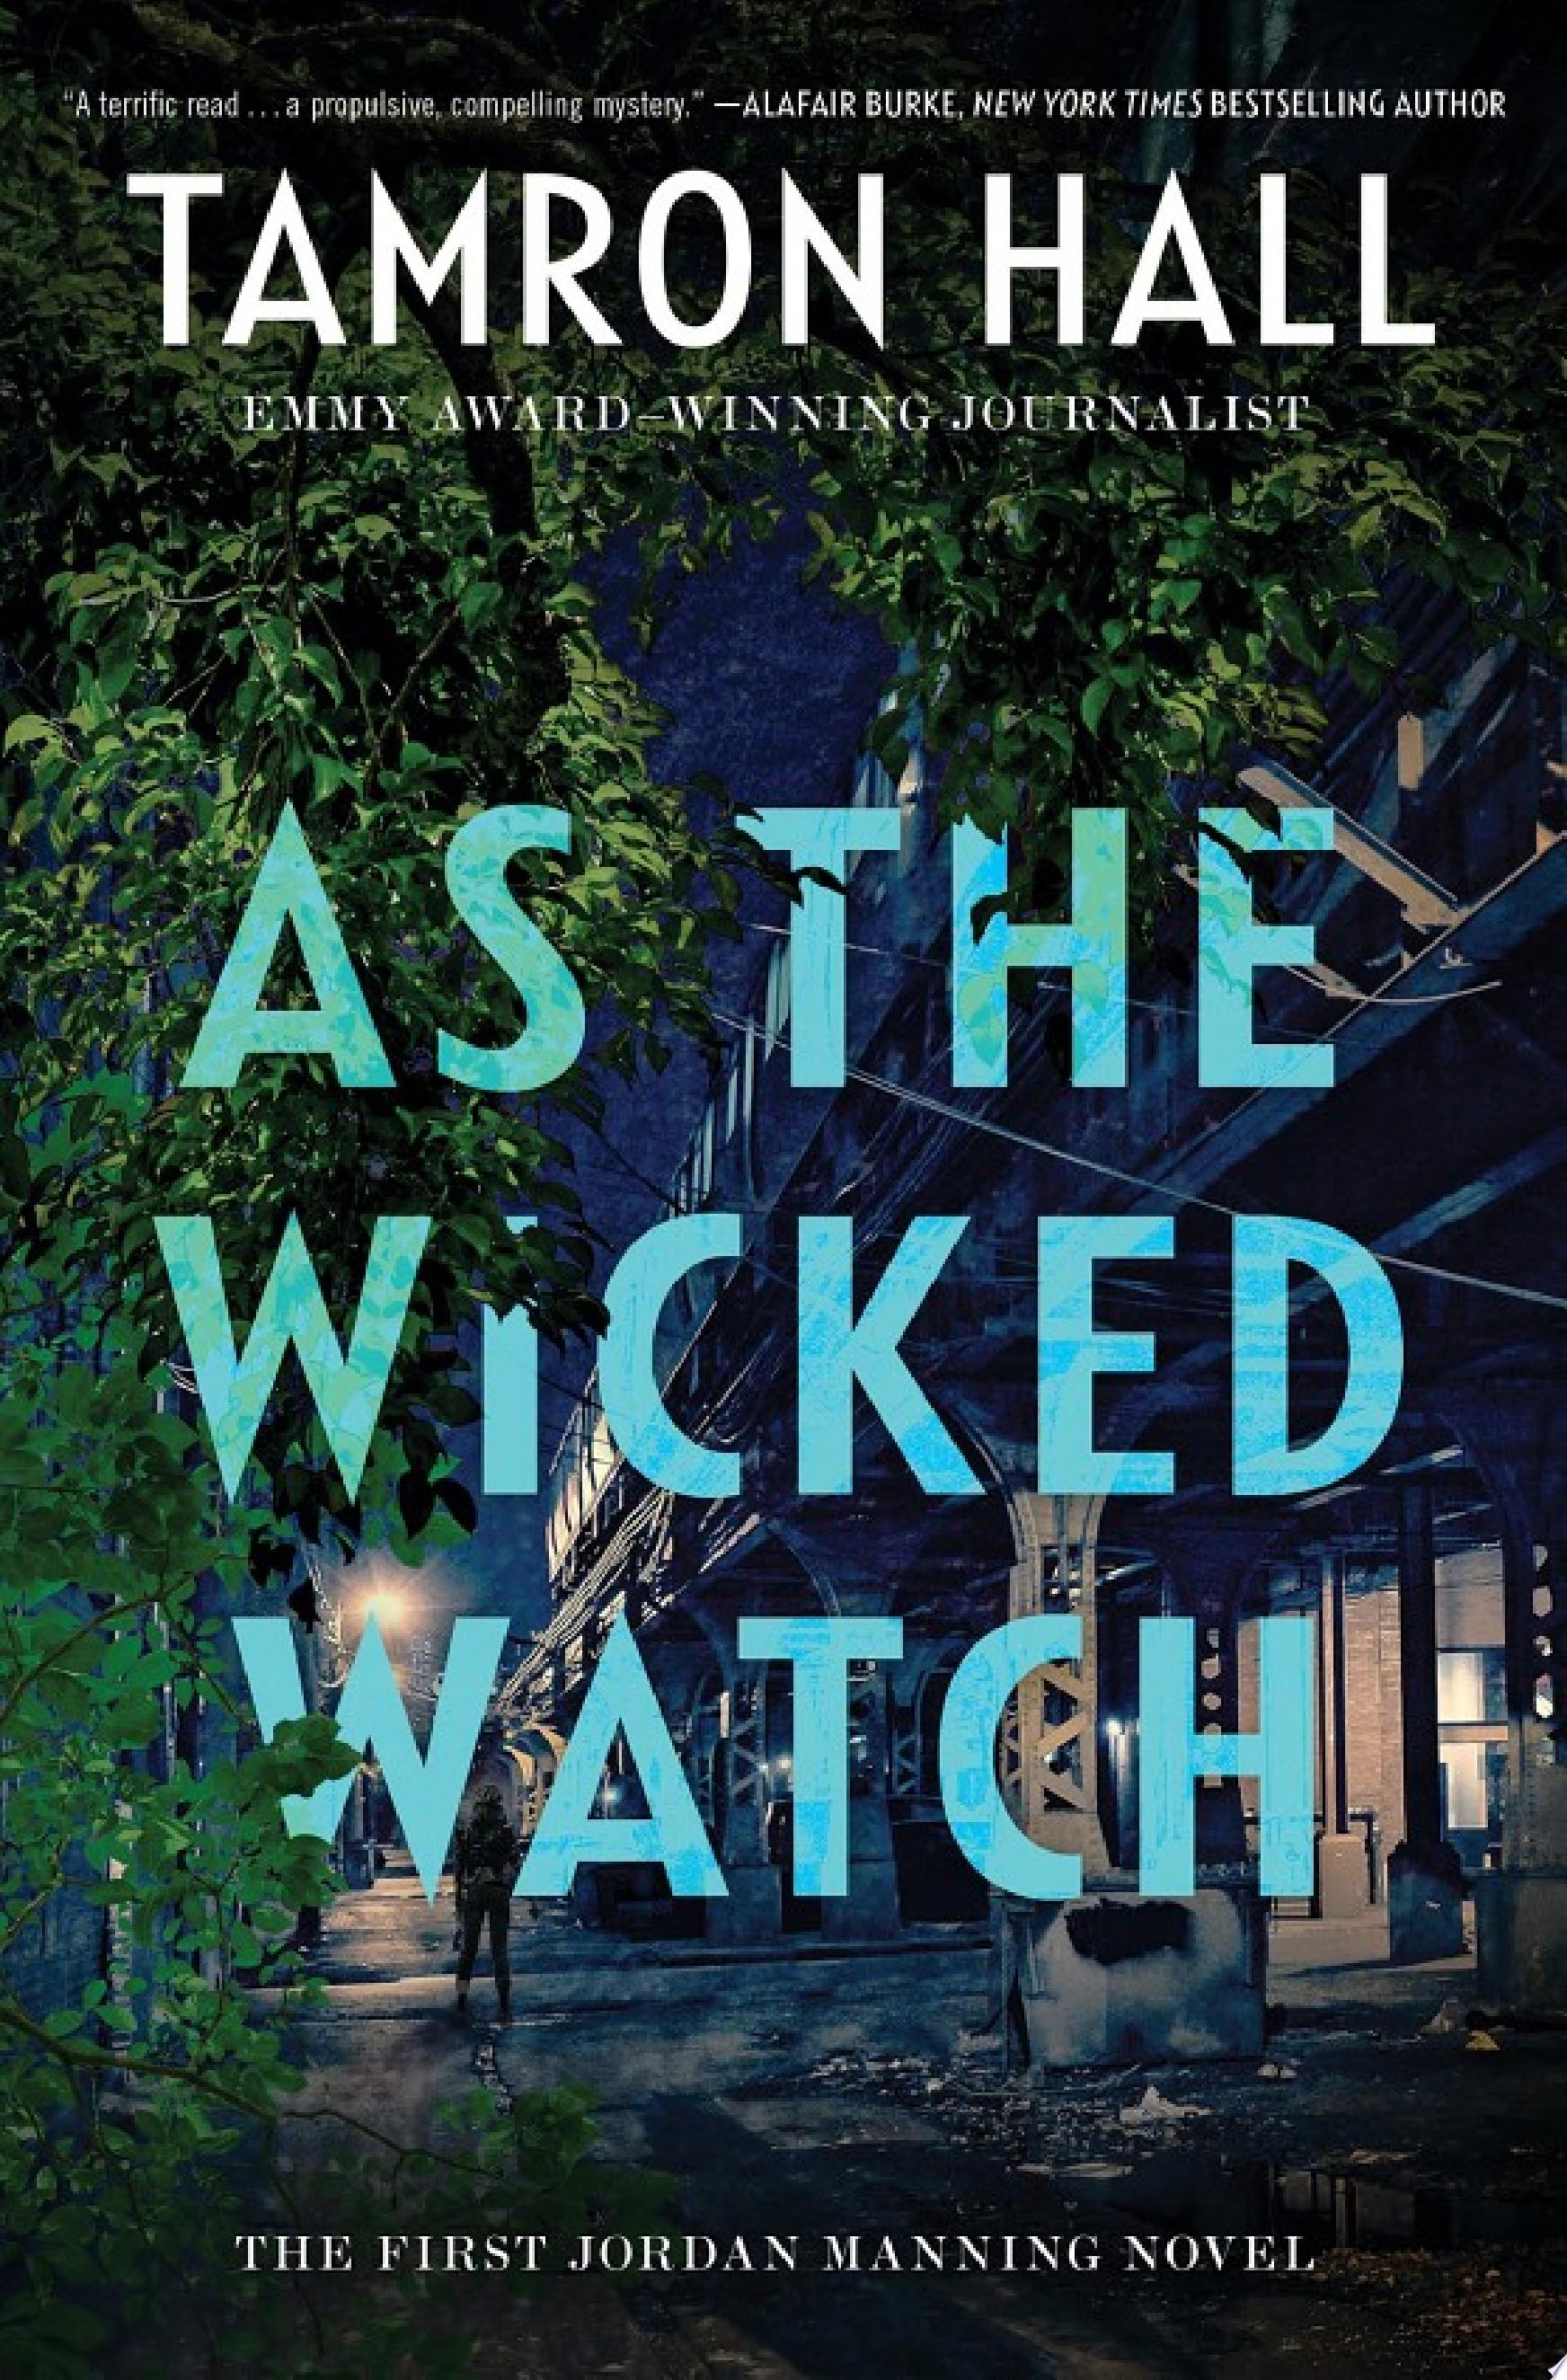 Image for "As the Wicked Watch"